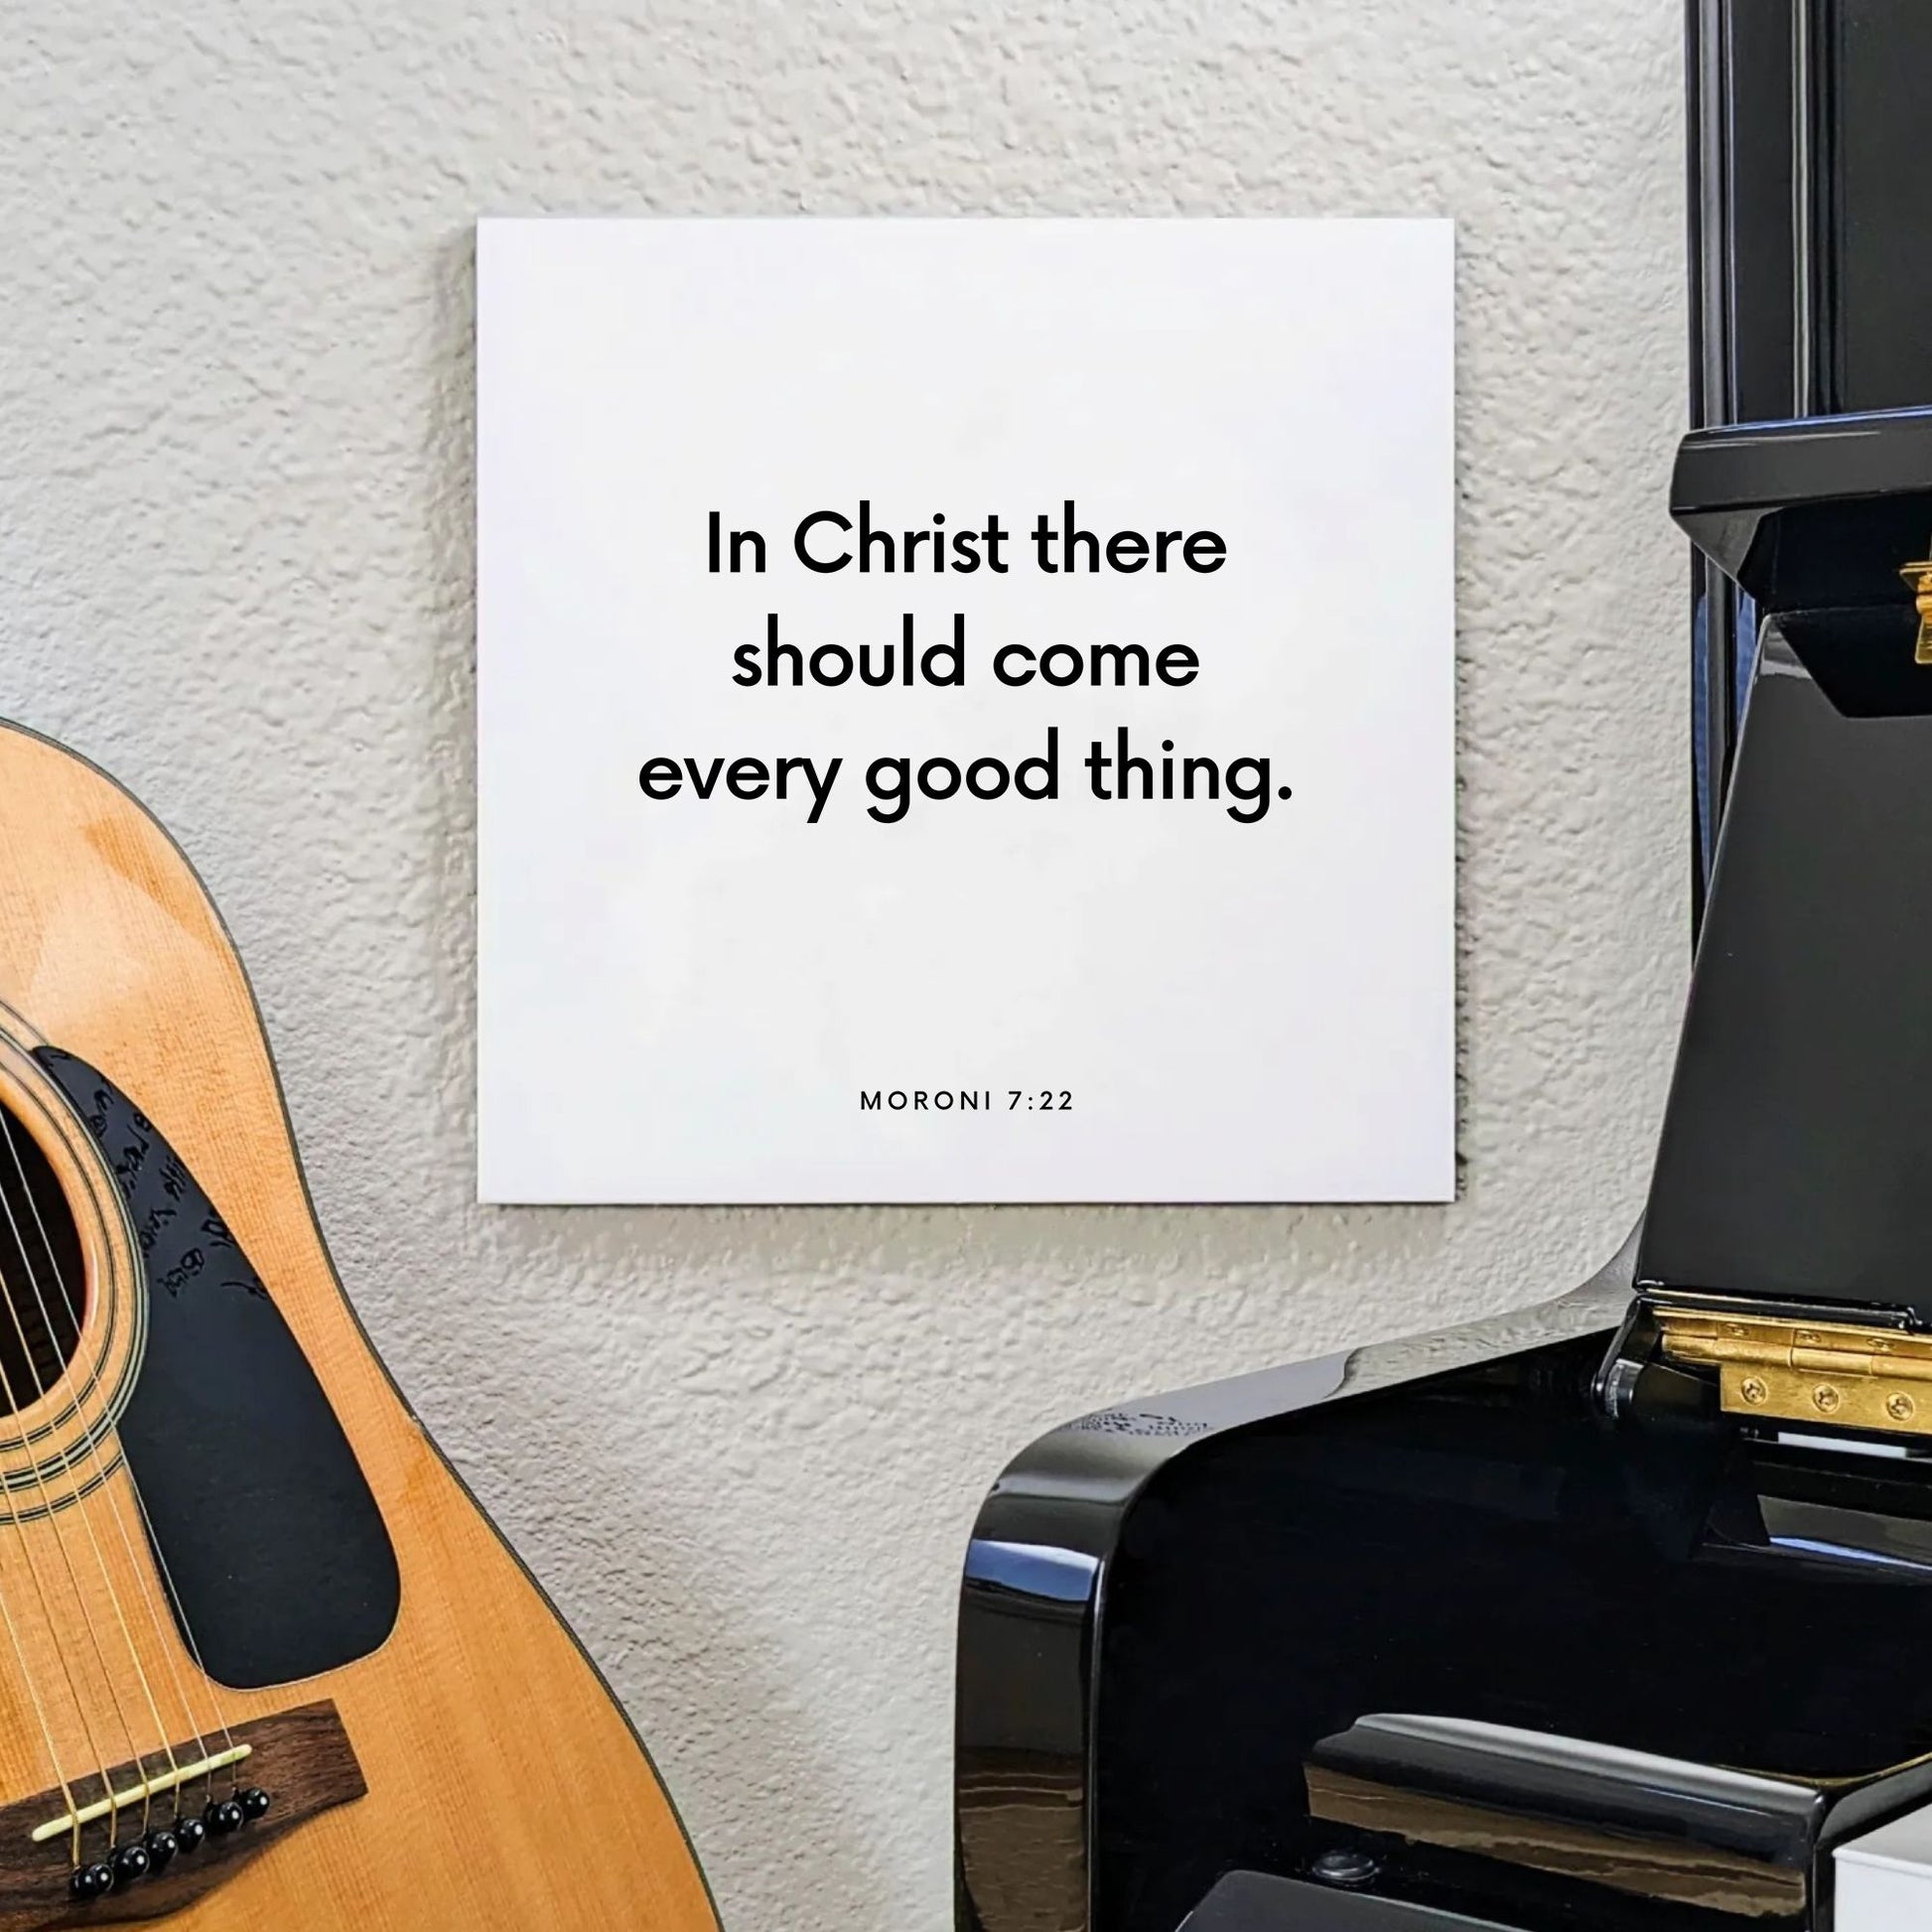 Music mouting of the scripture tile for Moroni 7:22 - "In Christ there should come every good thing"